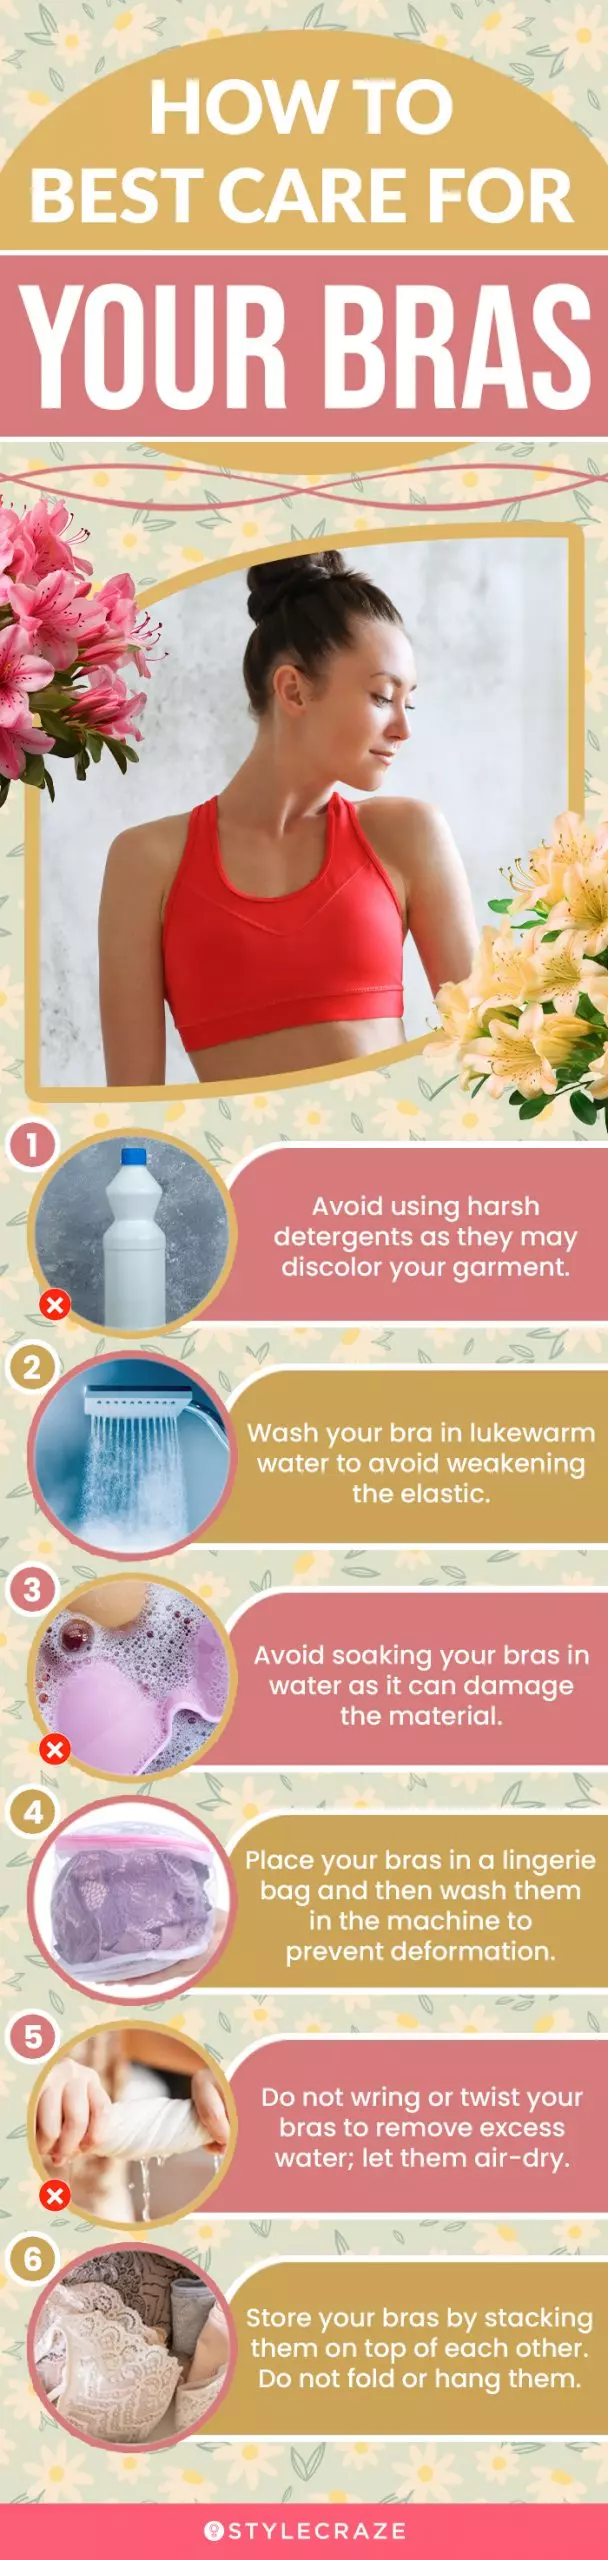  How To Best Care For Your Bras (infographic)